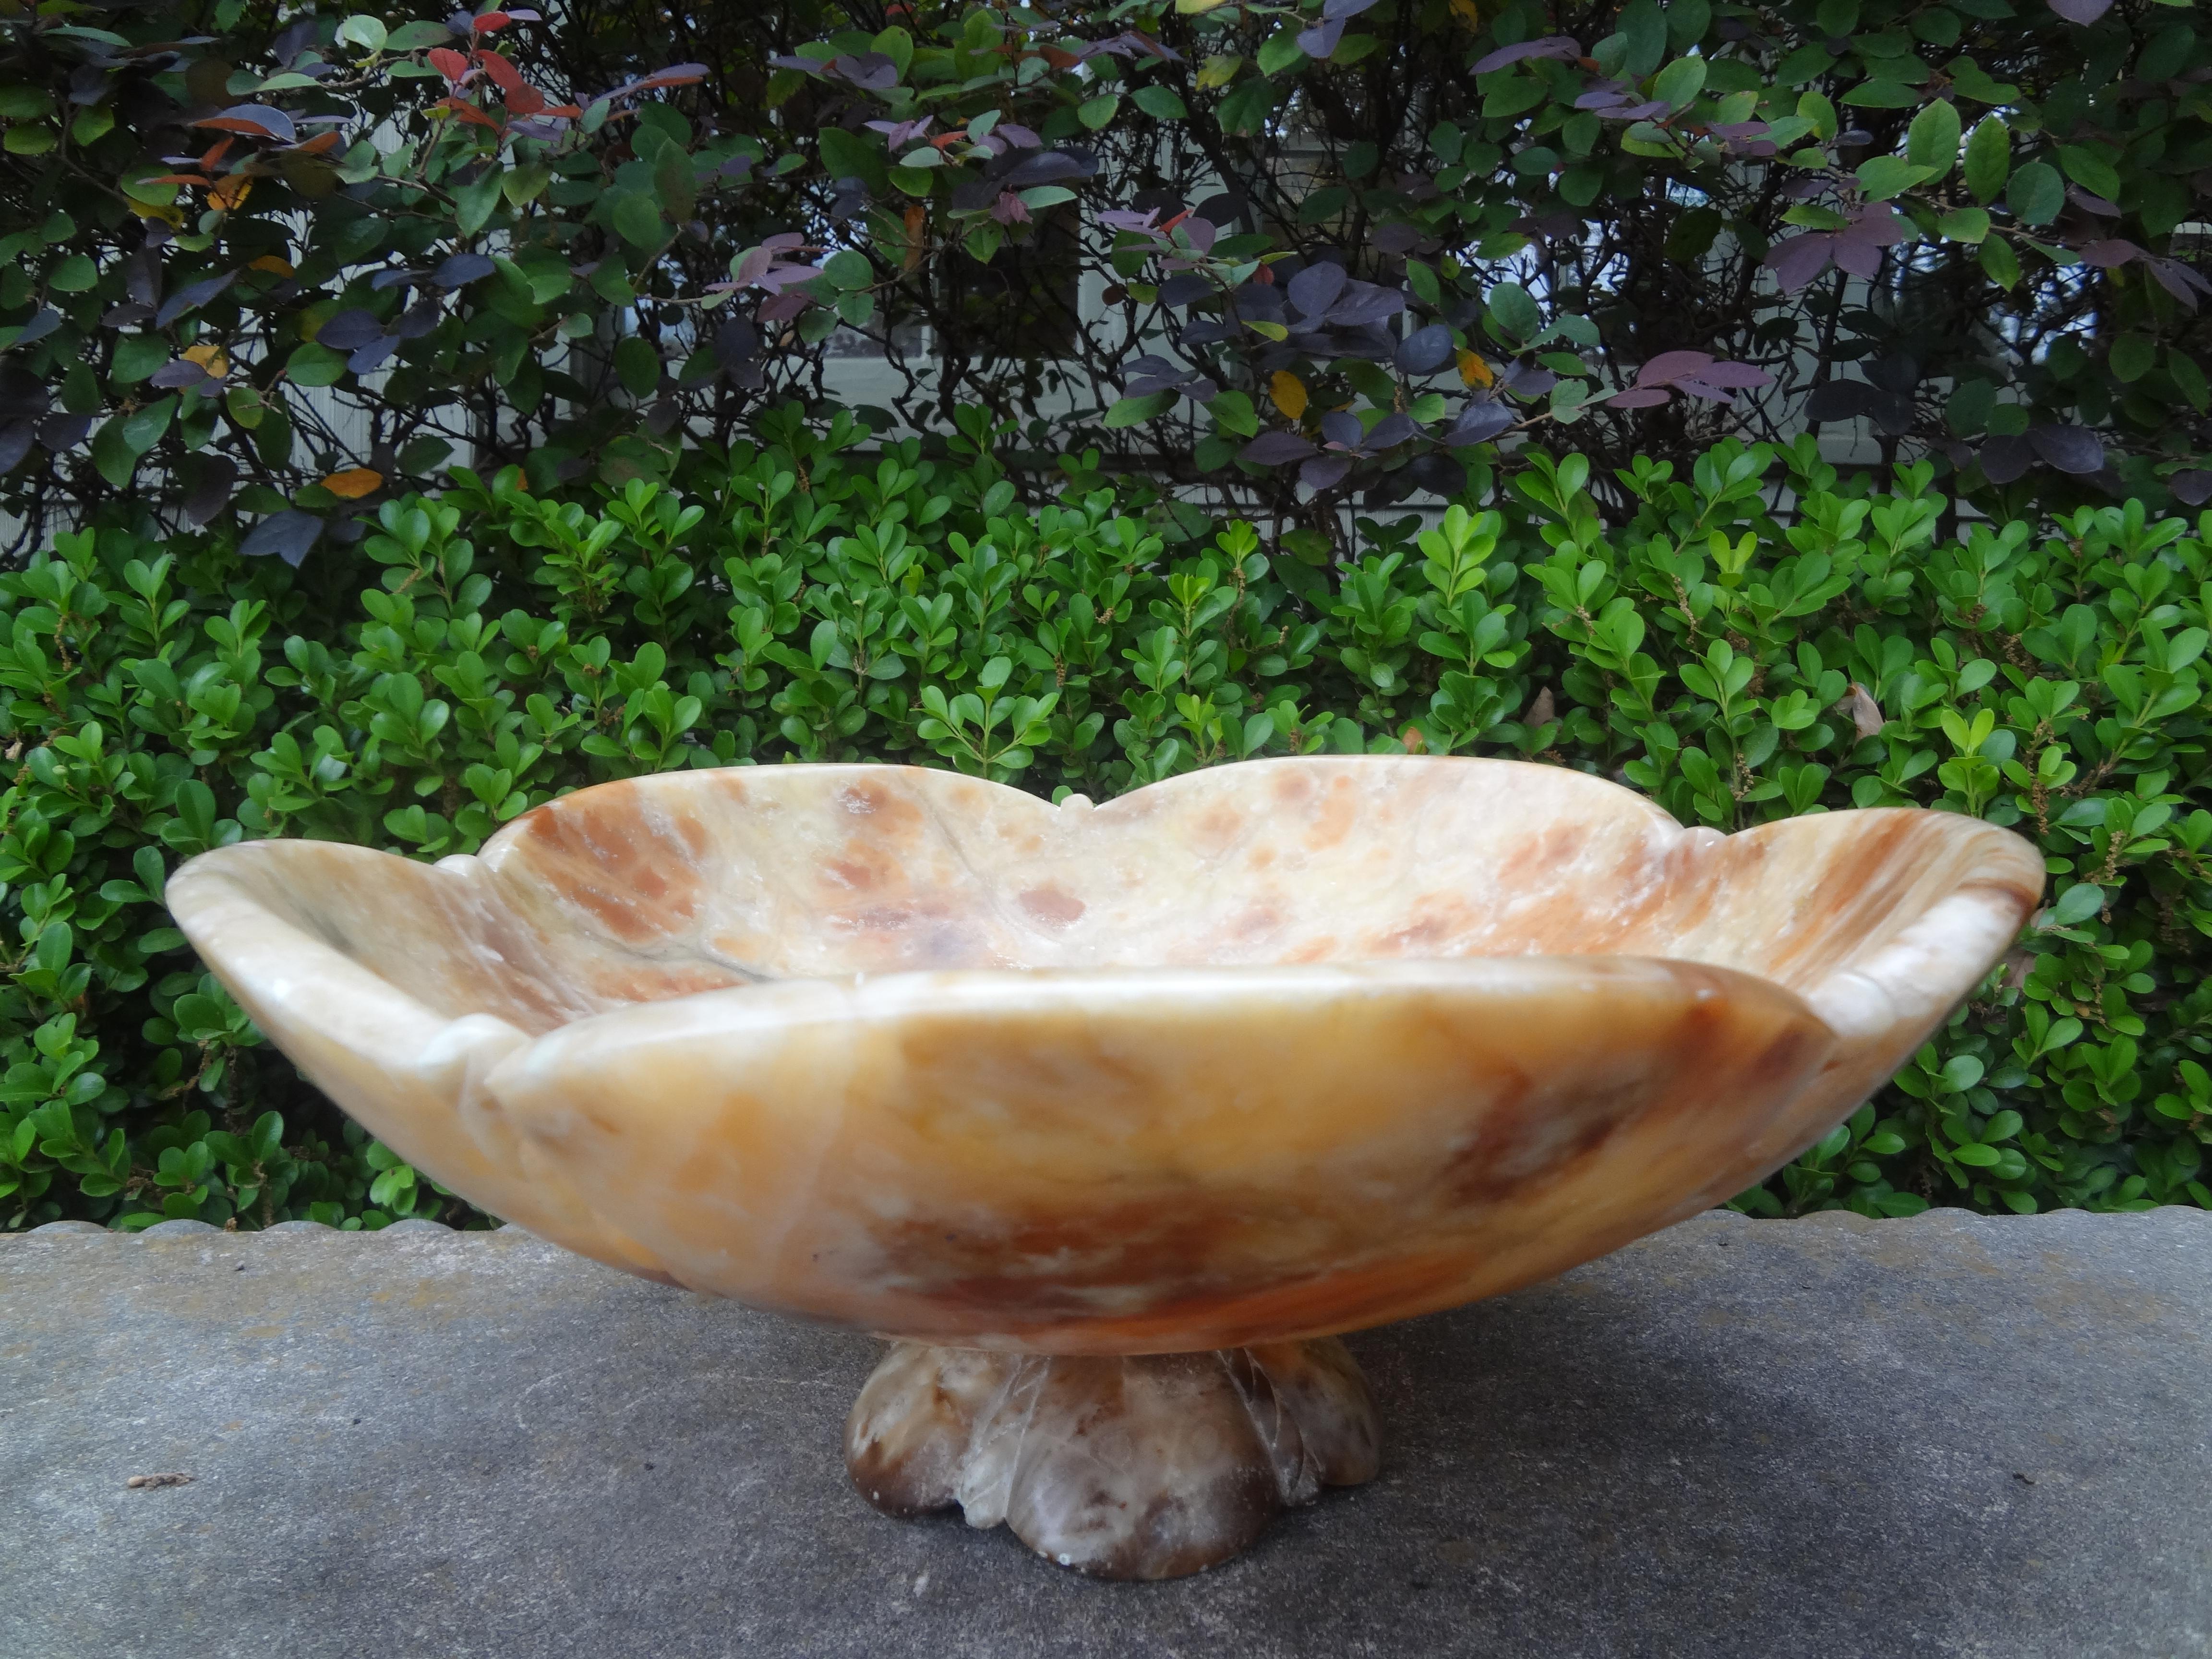 Vintage Italian Alabaster footed bowl or Tazza.
This large shapely Italian bowl, tazza, vide-poche or compote was made of a beautiful honey colored alabaster mounted on a pedestal base.
Great console table, coffee table or bookcase accessory!